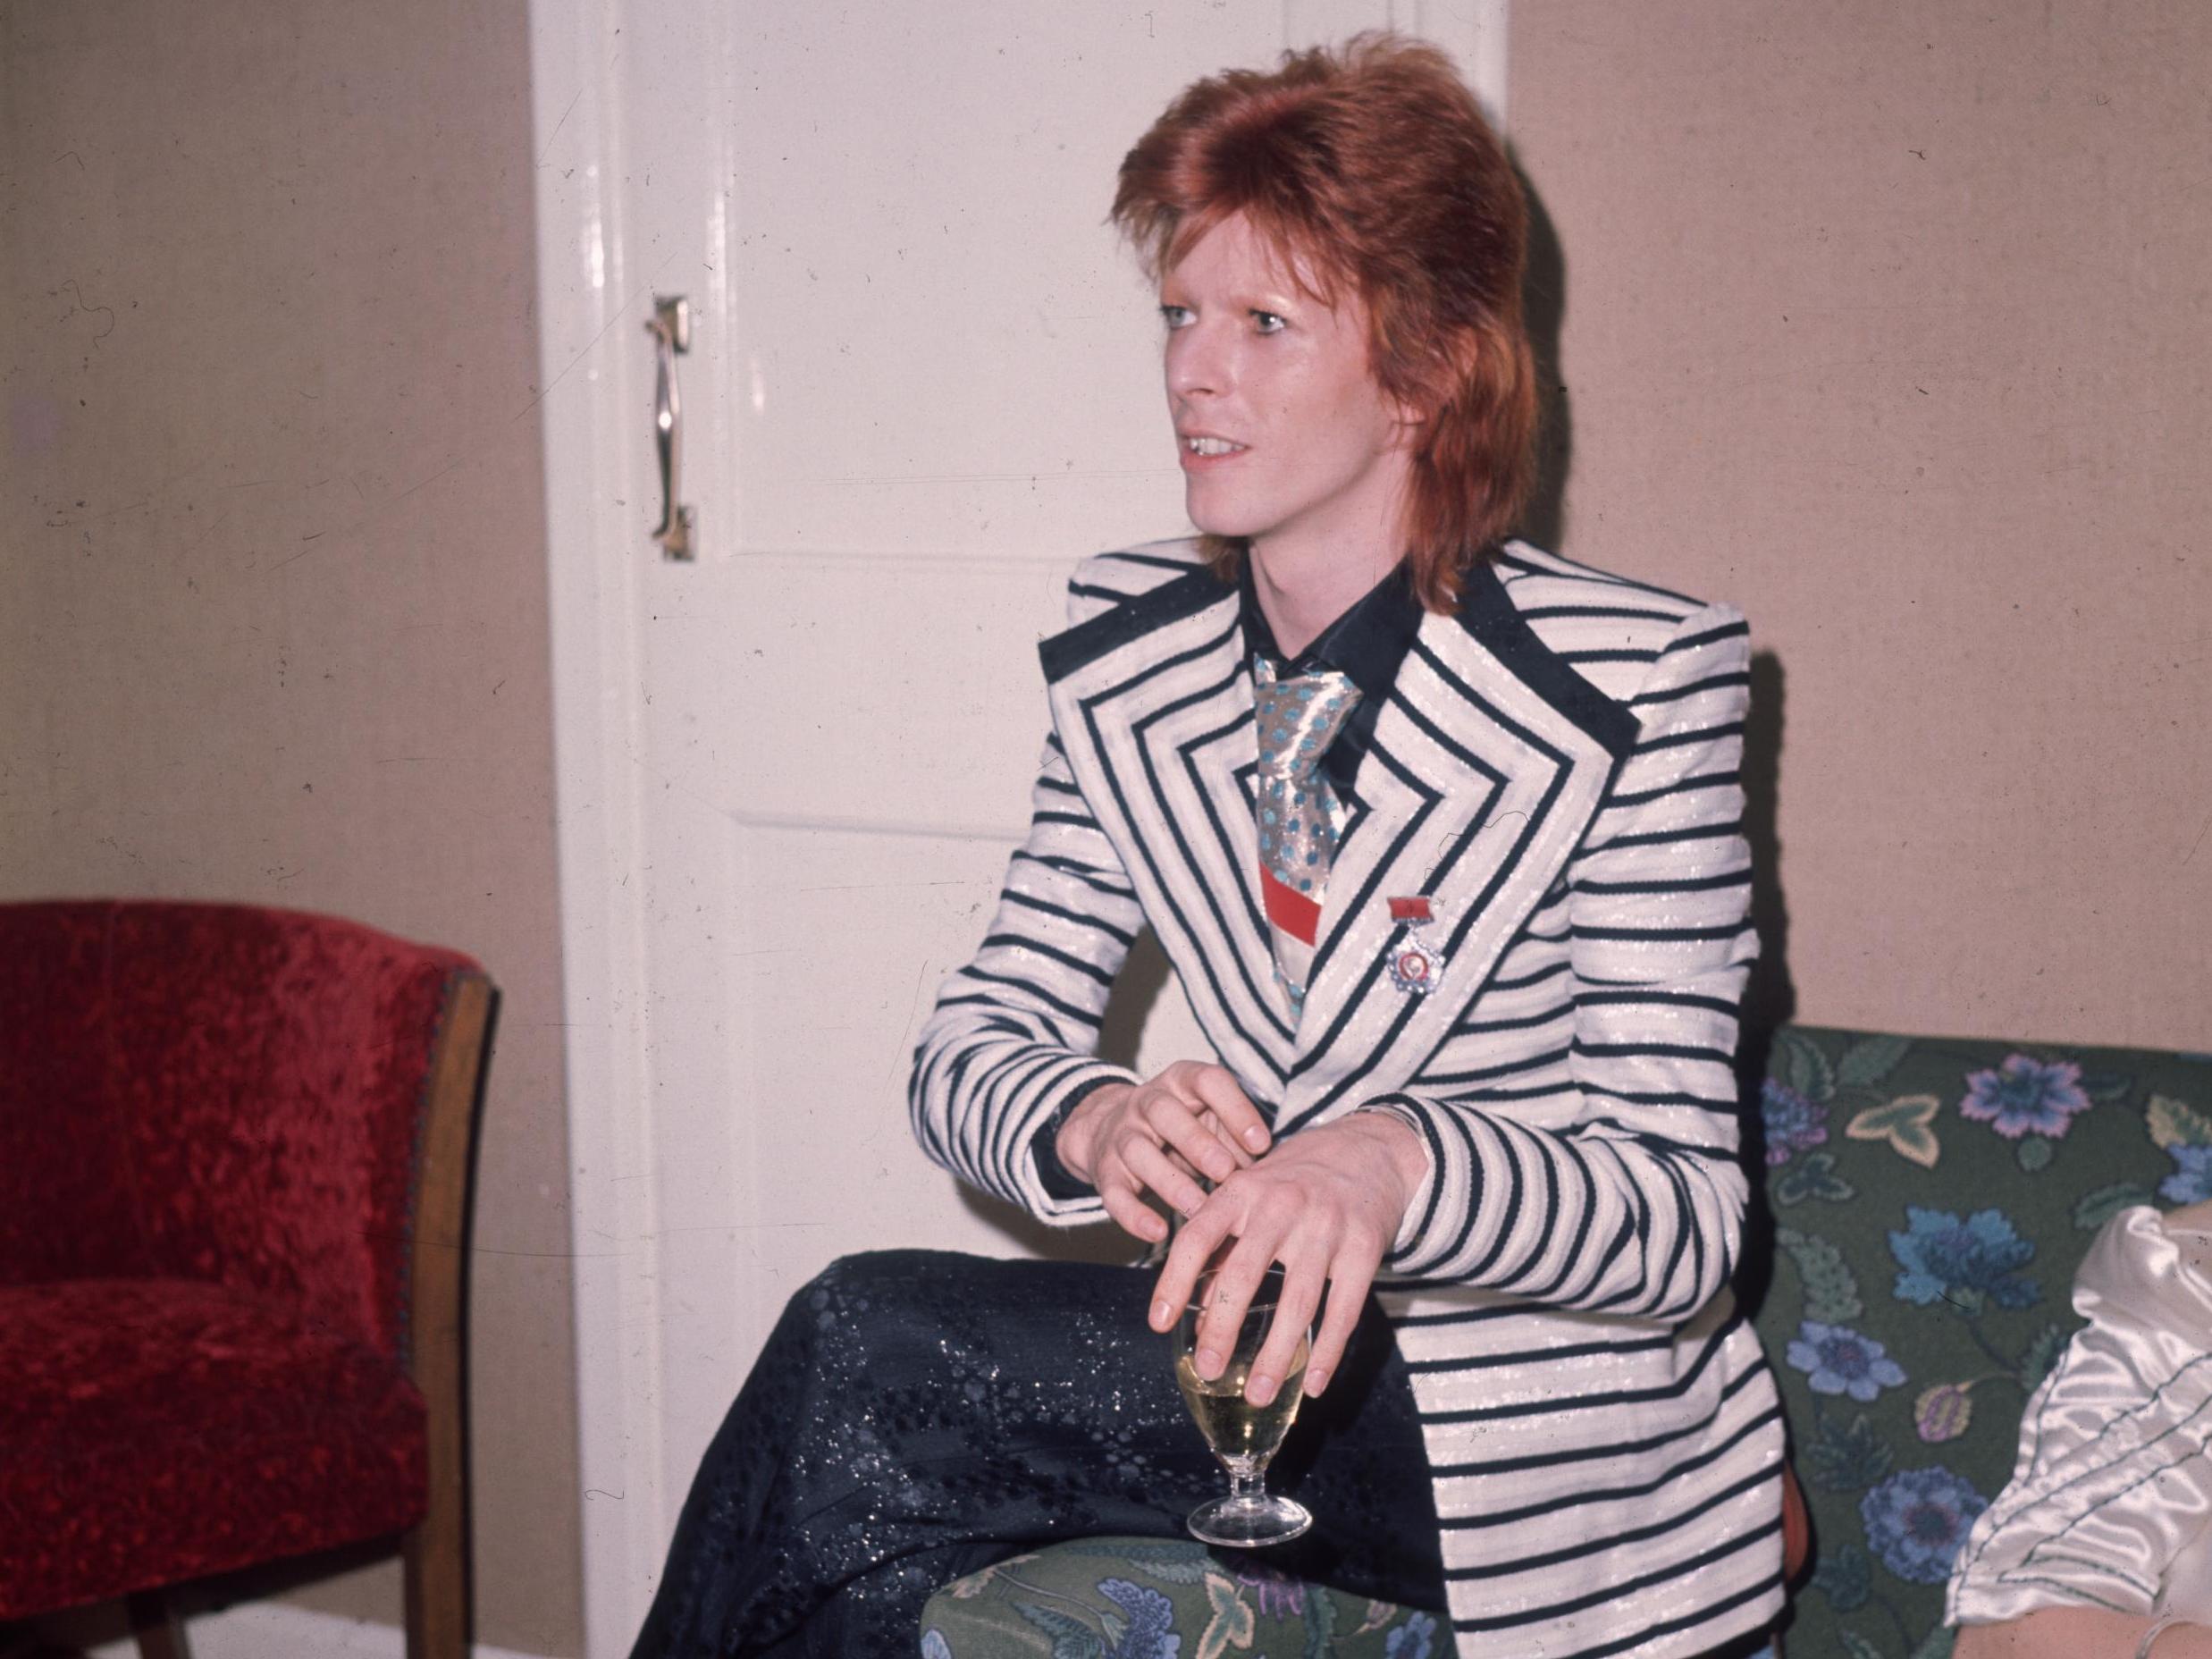 Bowie’s glam period, back in May 1973, in black and white horizontally striped jacket with wide lapels (Getty)